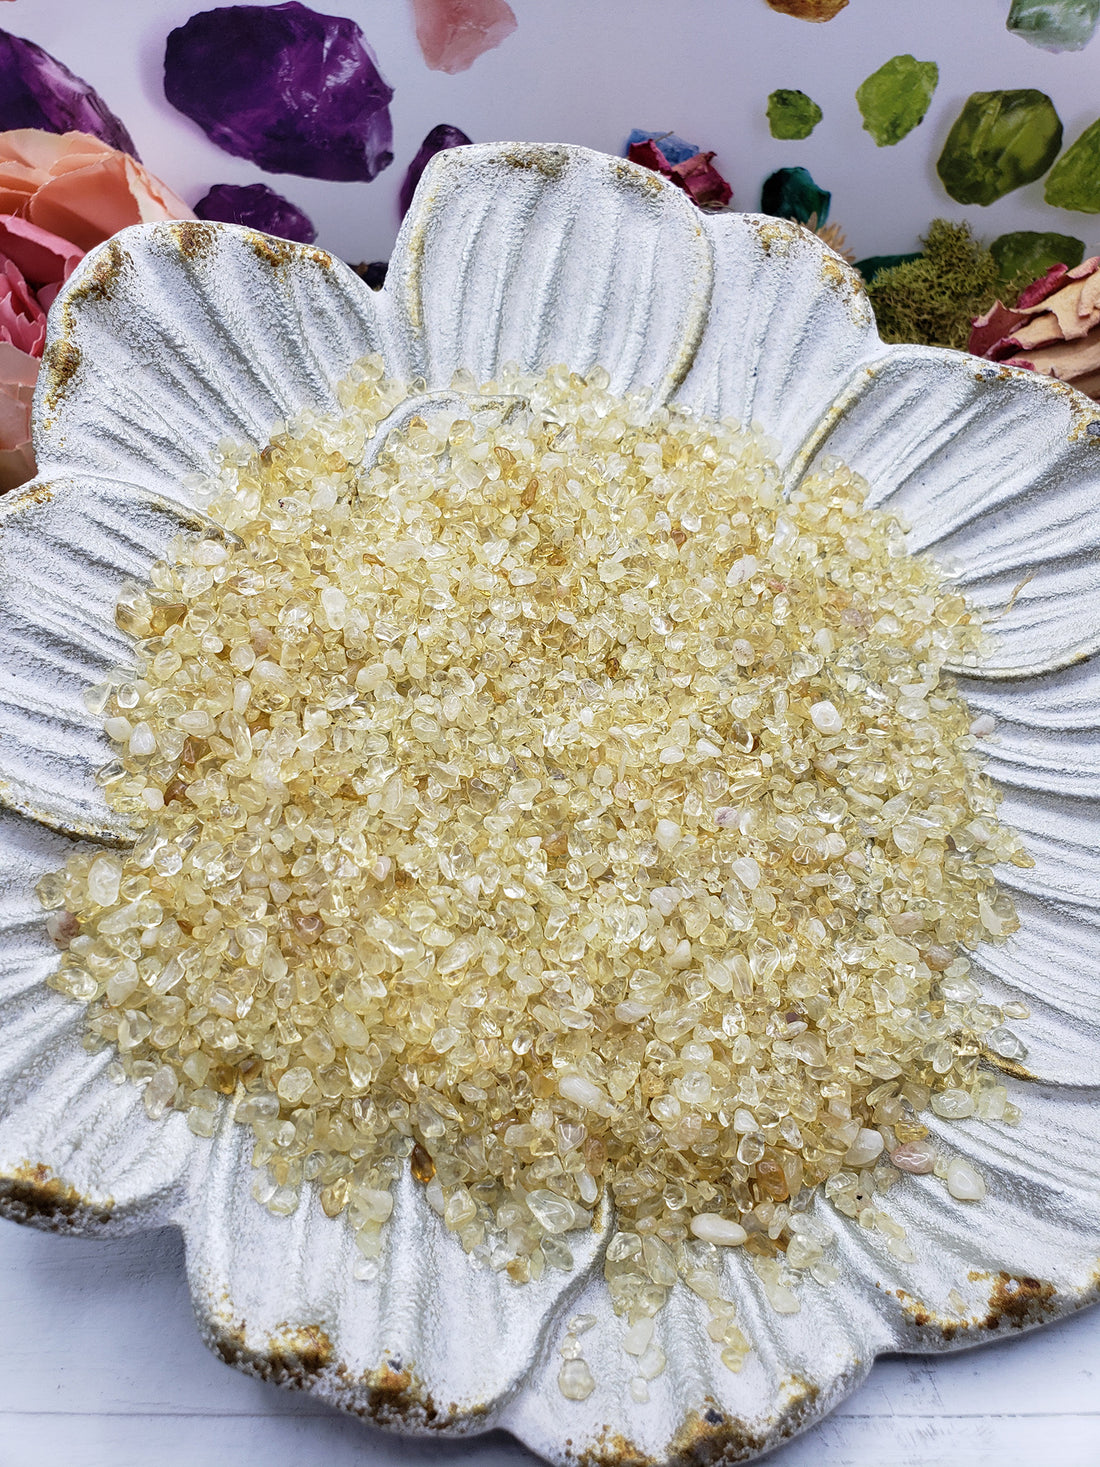 seven ounces of citrine stone chips on floral dish display